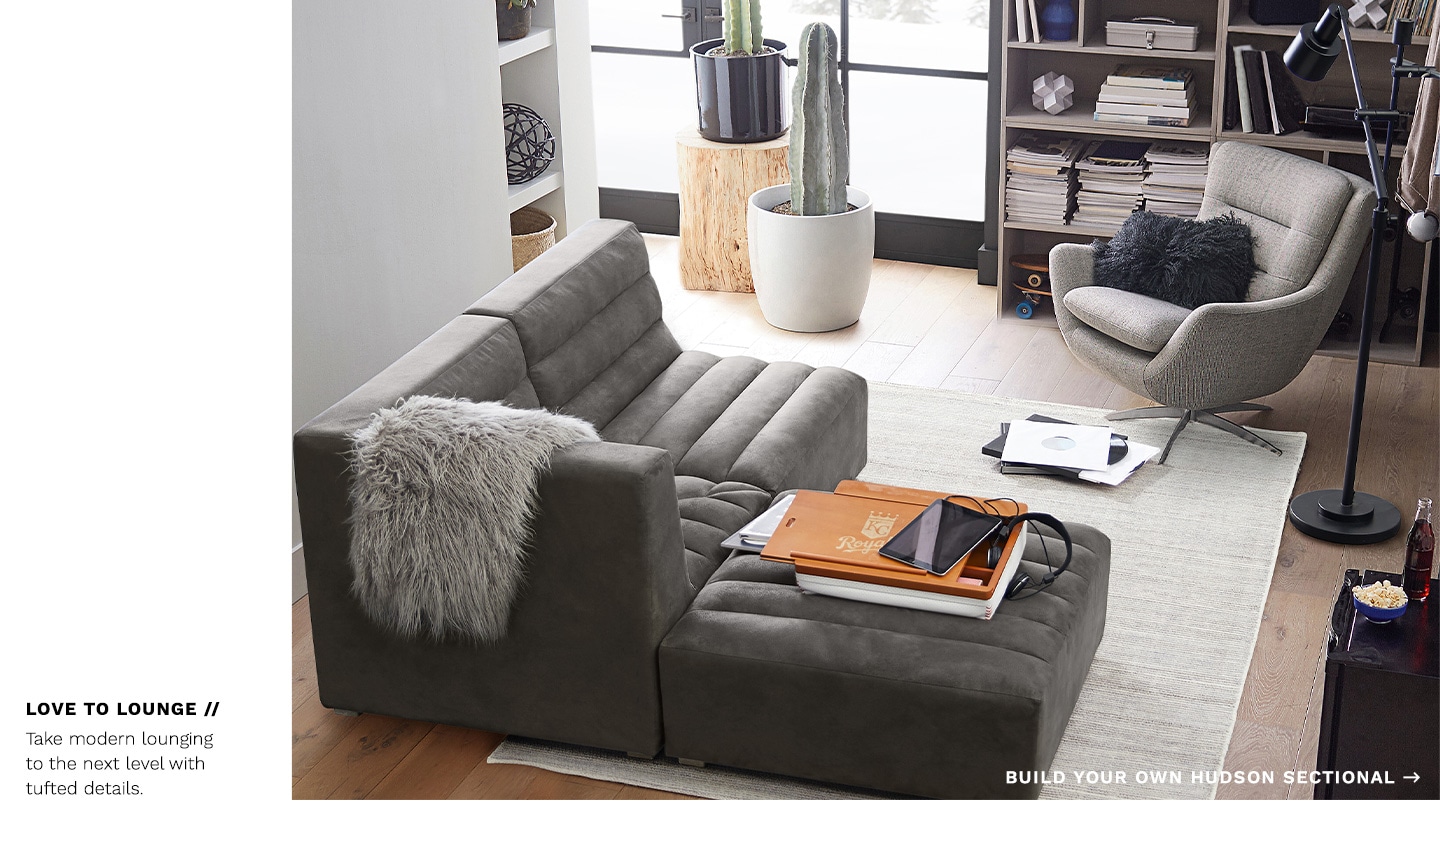 Build Your Own Hudson Sectional